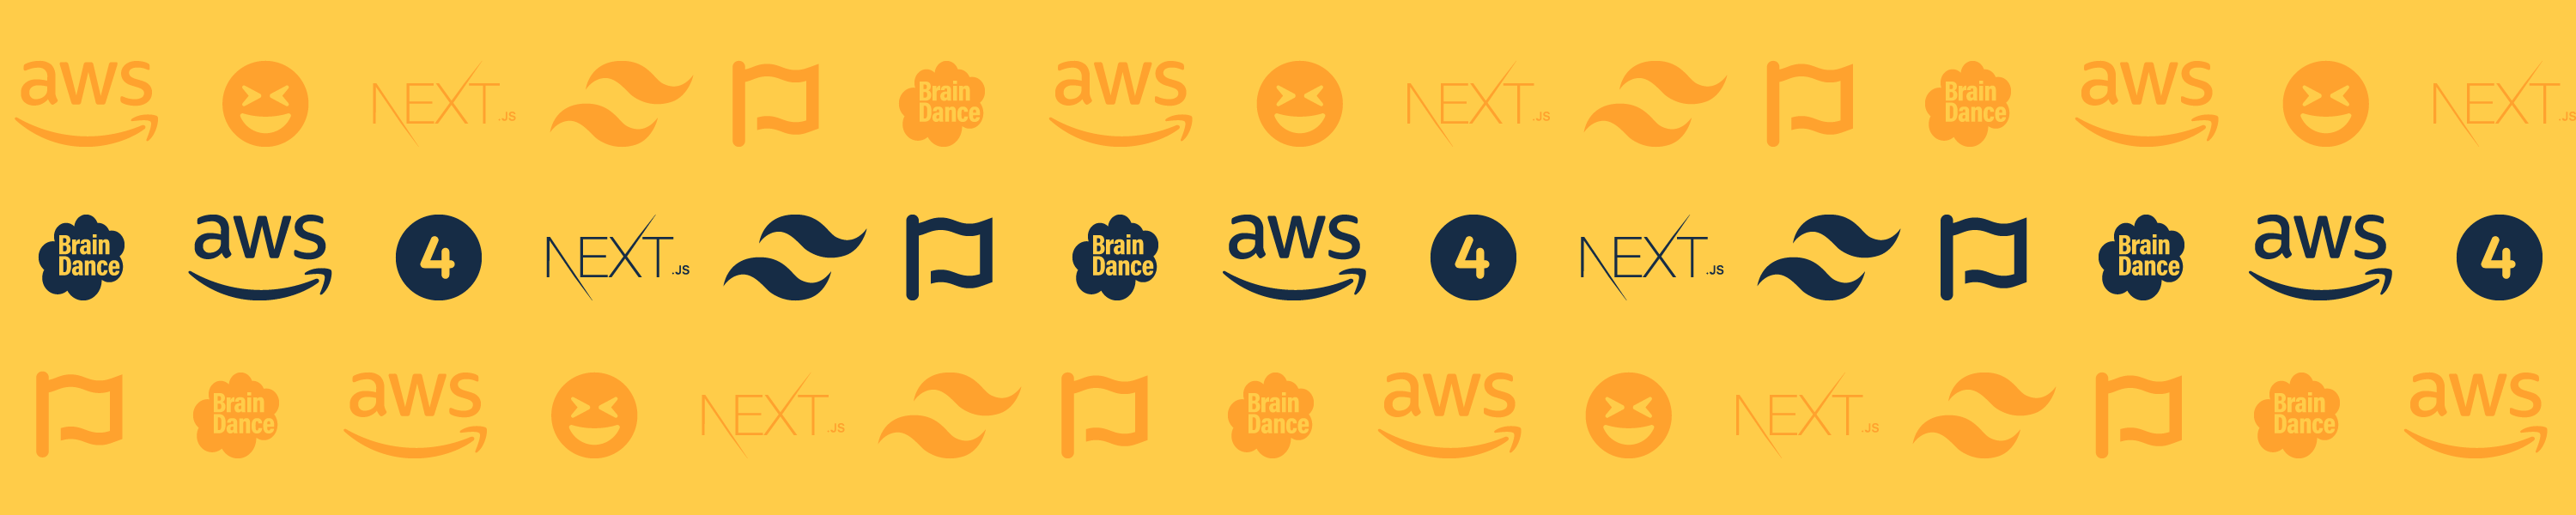 Font Awesome, Tailwind, AWS, React and Nextjs logo banner